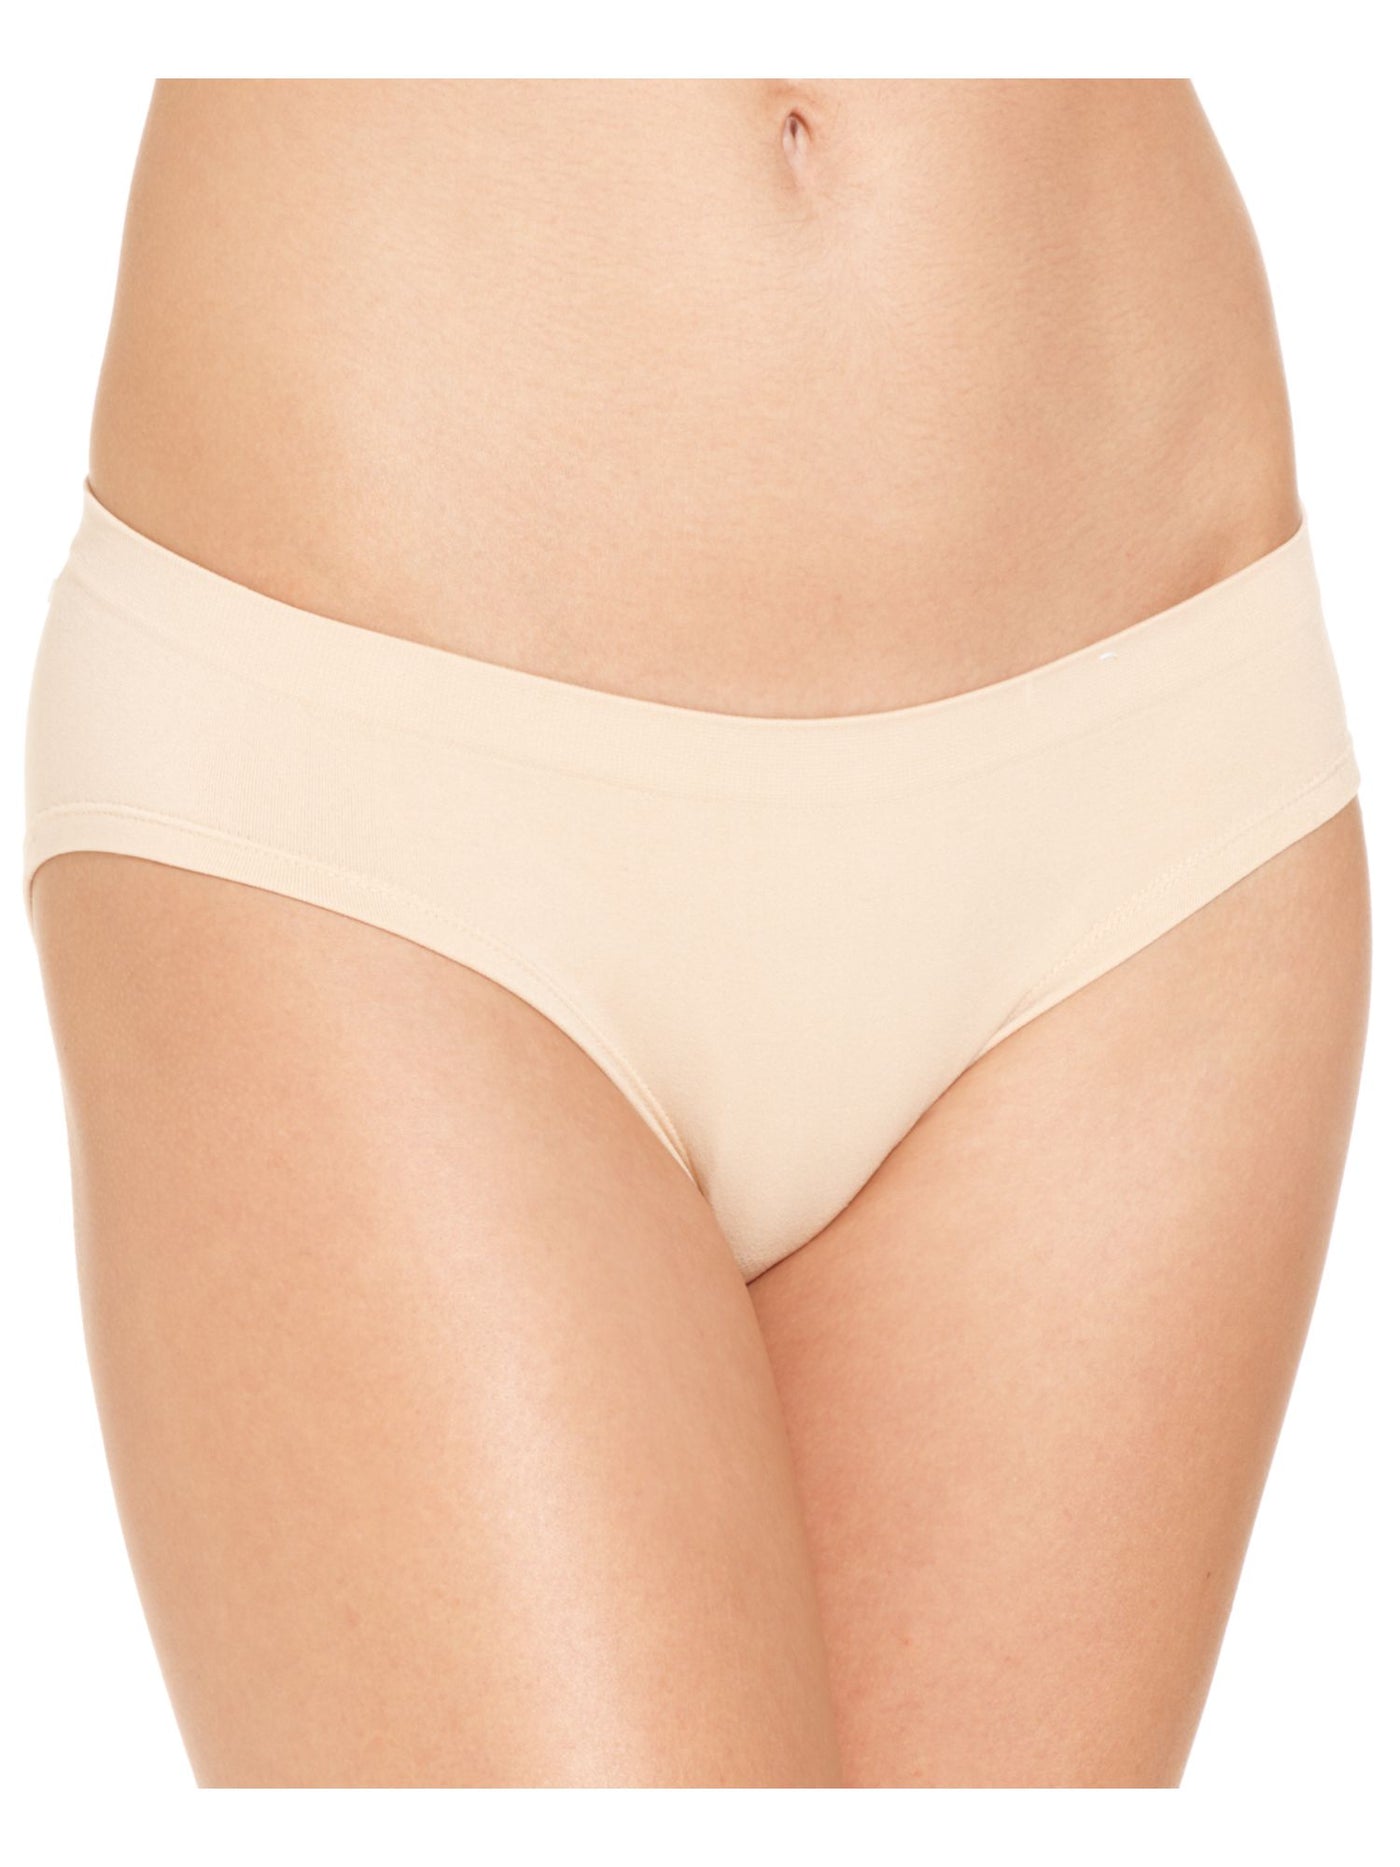 JENNI Intimates Beige Solid Everyday Hipster Size: XXL